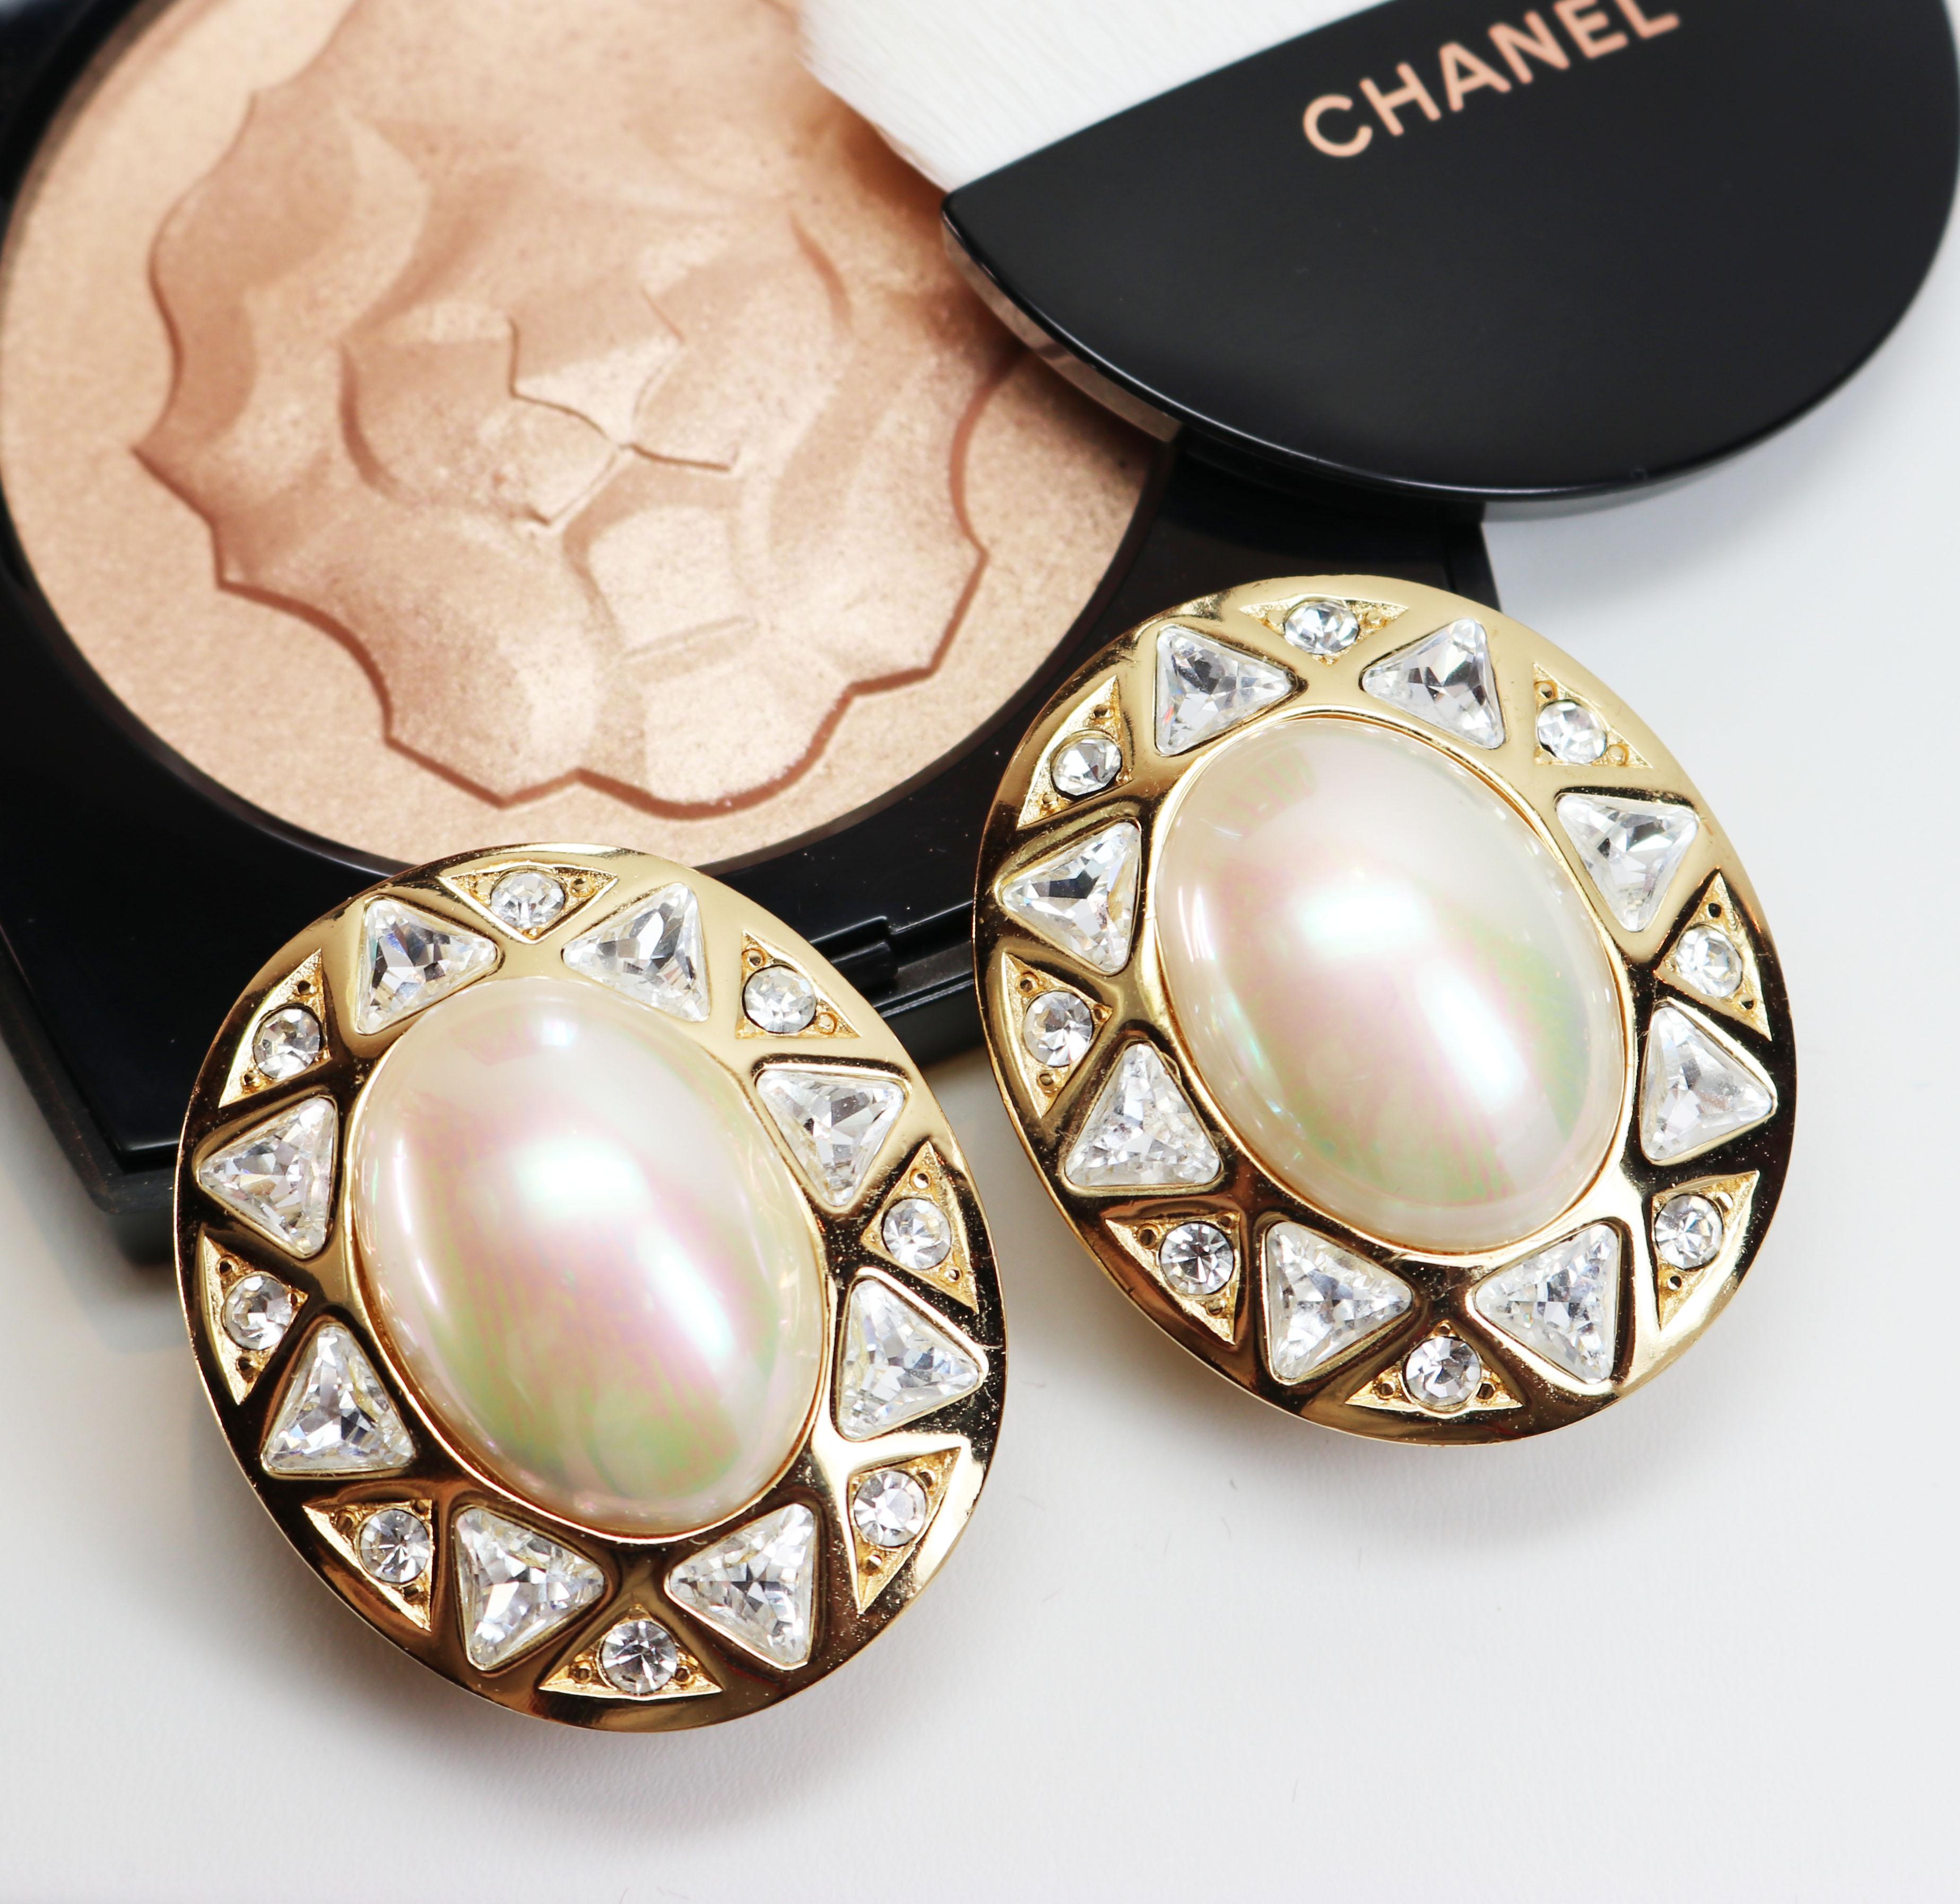 CHRISTIAN DIOR EARRINGS *signed* Authentic Enormous Austrian Crystal & Gold Plated Pearl Clip On Dior Designer Earrings
These enormous French designer earrings feature oval, cream colored, simulated pearls framed with triangular shaped crystals